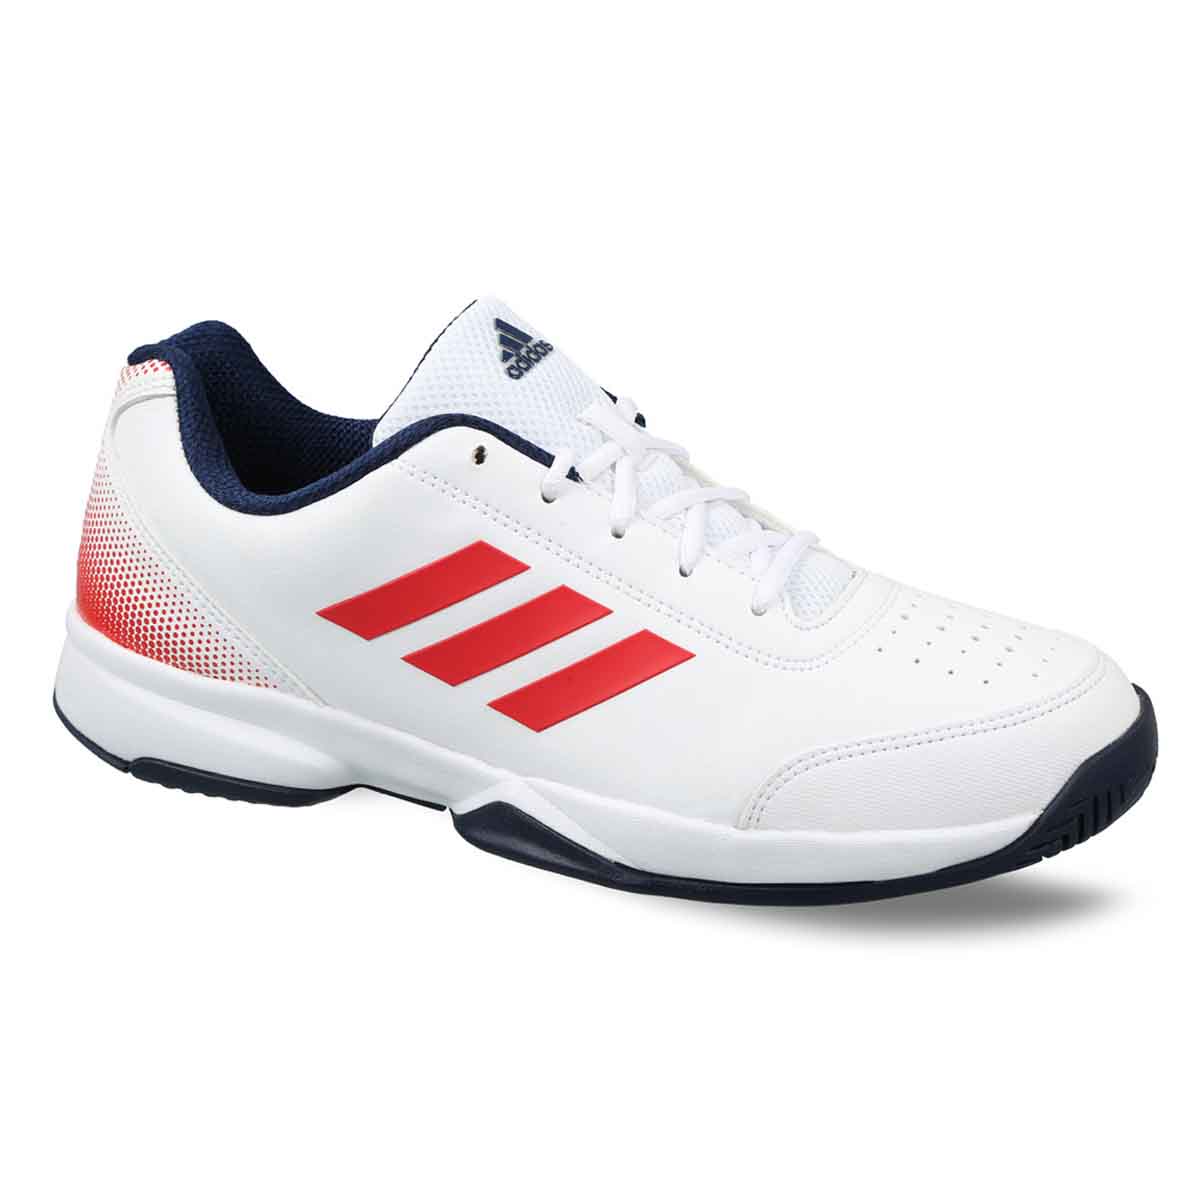 84 White Buy tennis shoes india for Women